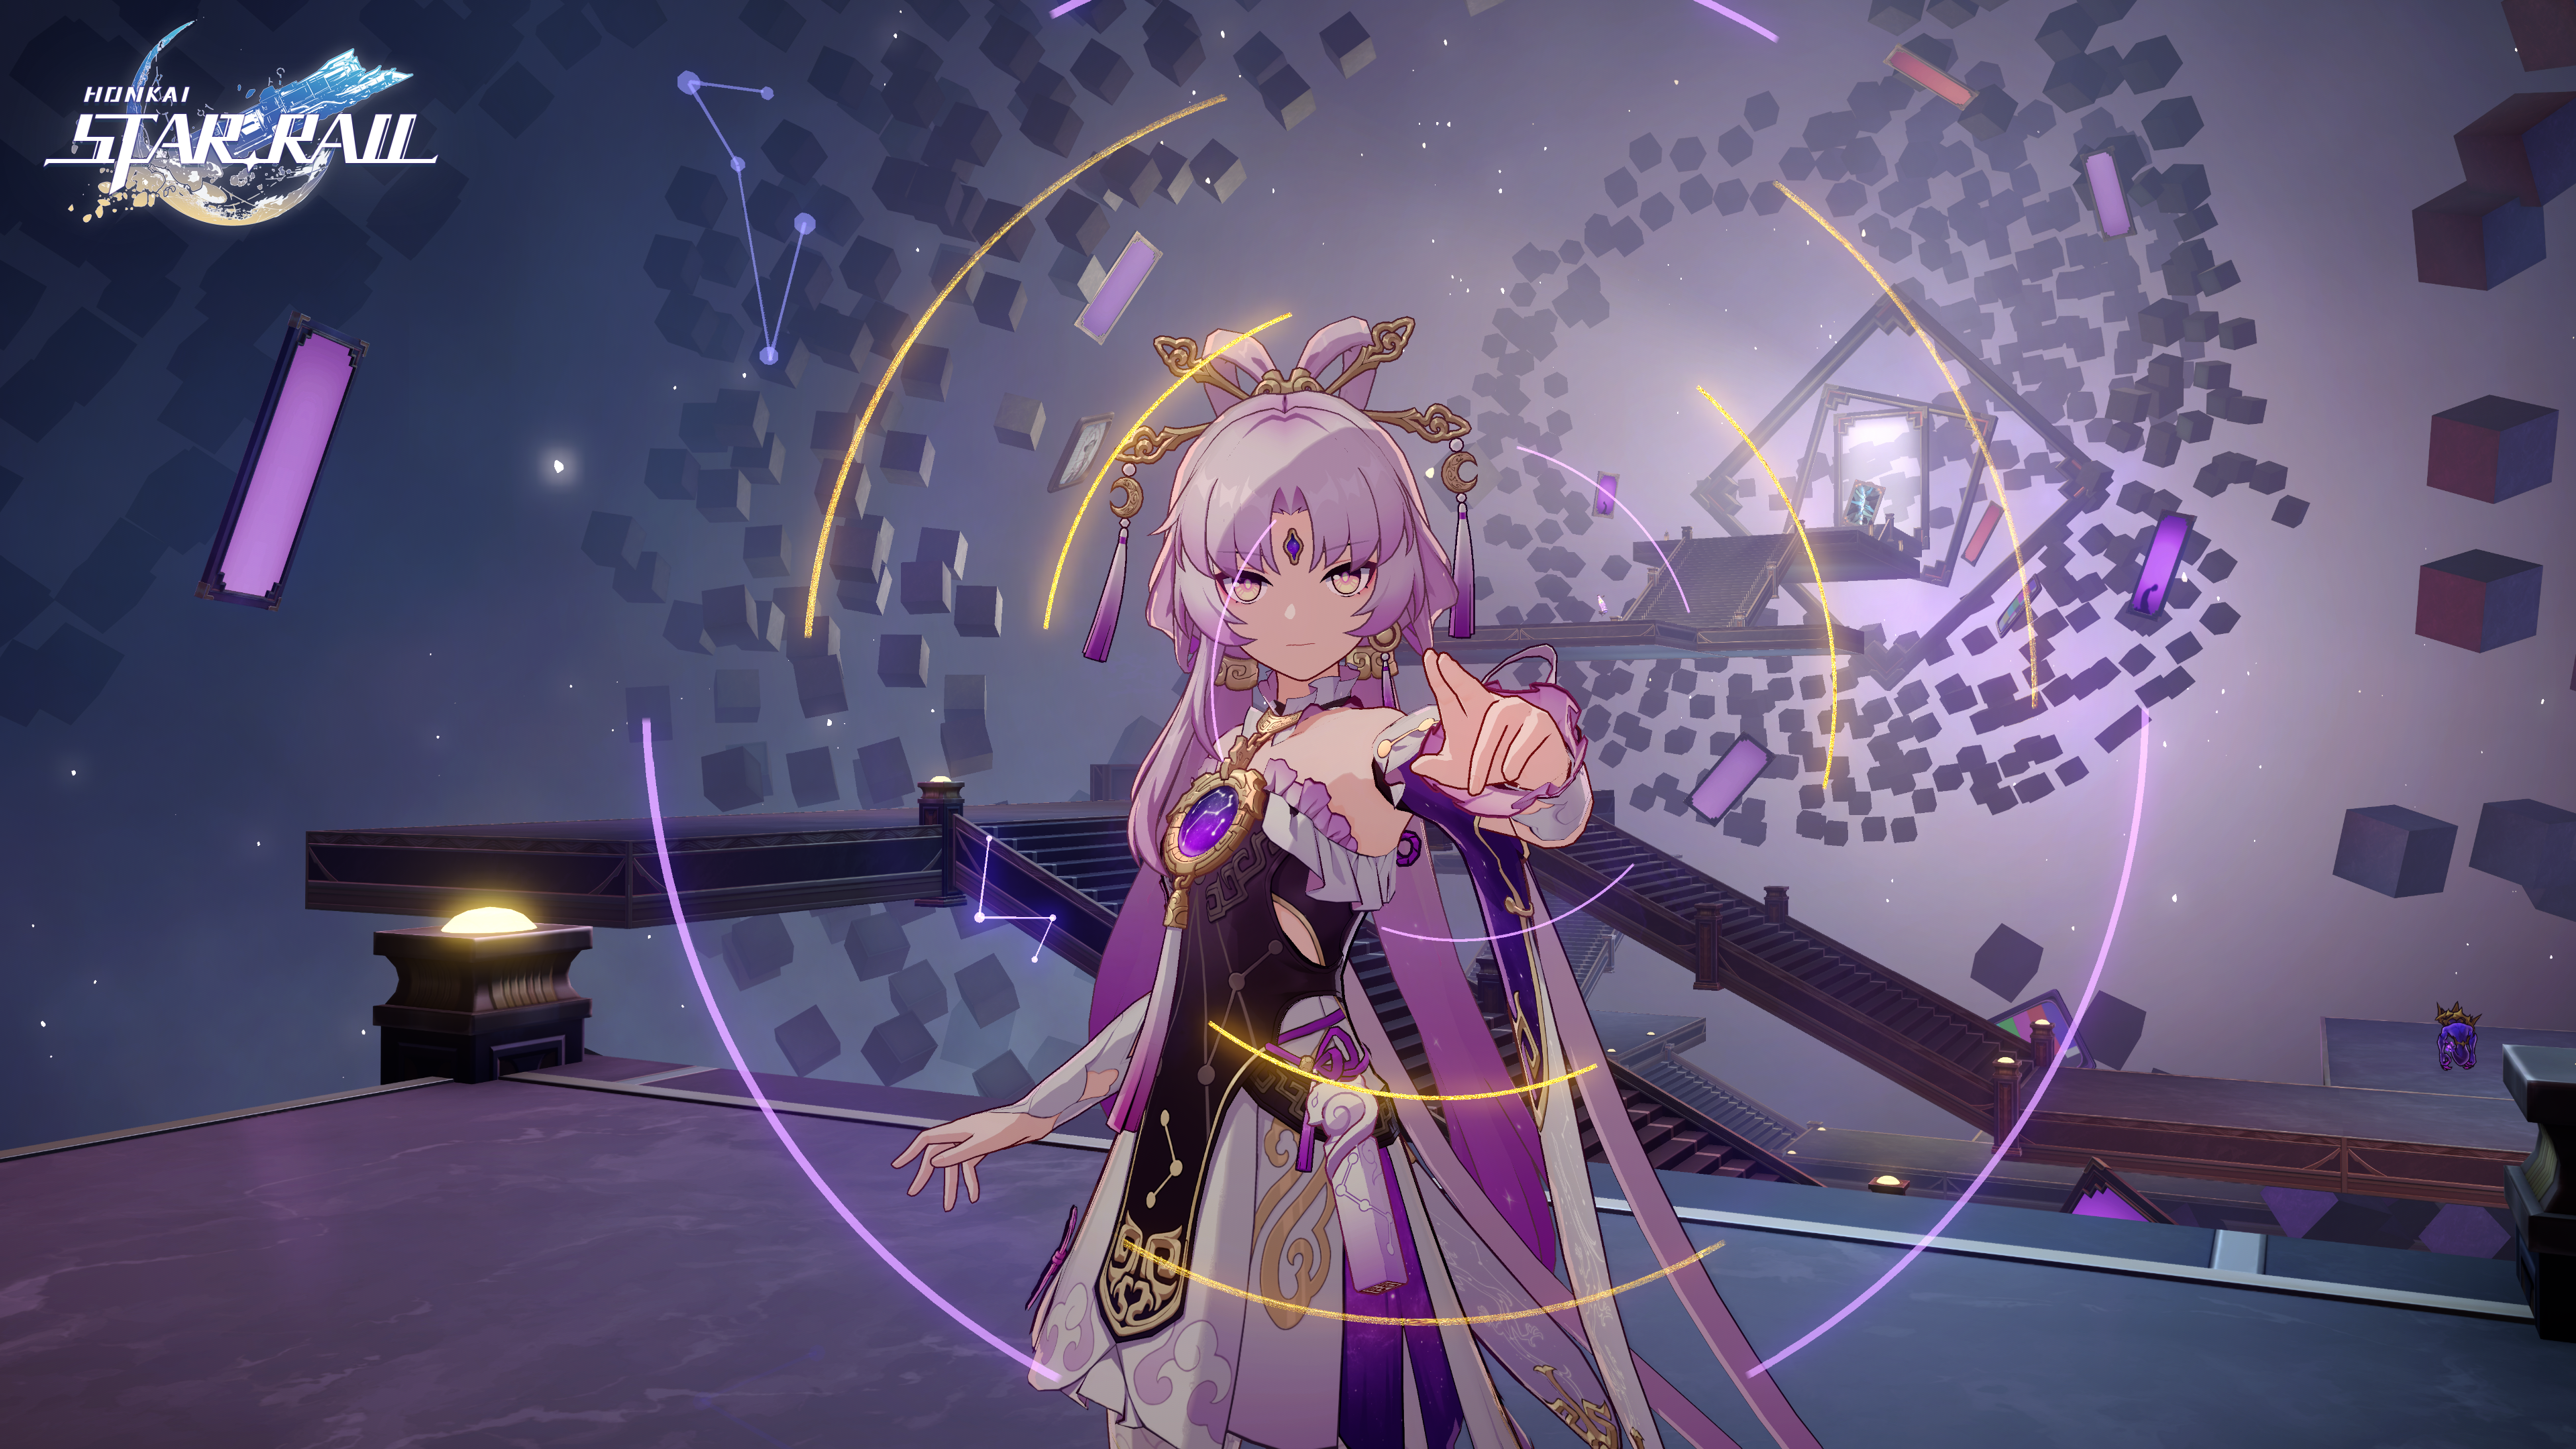 Honkai: Star Rail version 2.2 adds Robin, Boothill, and the Pecacony story climax on May 8